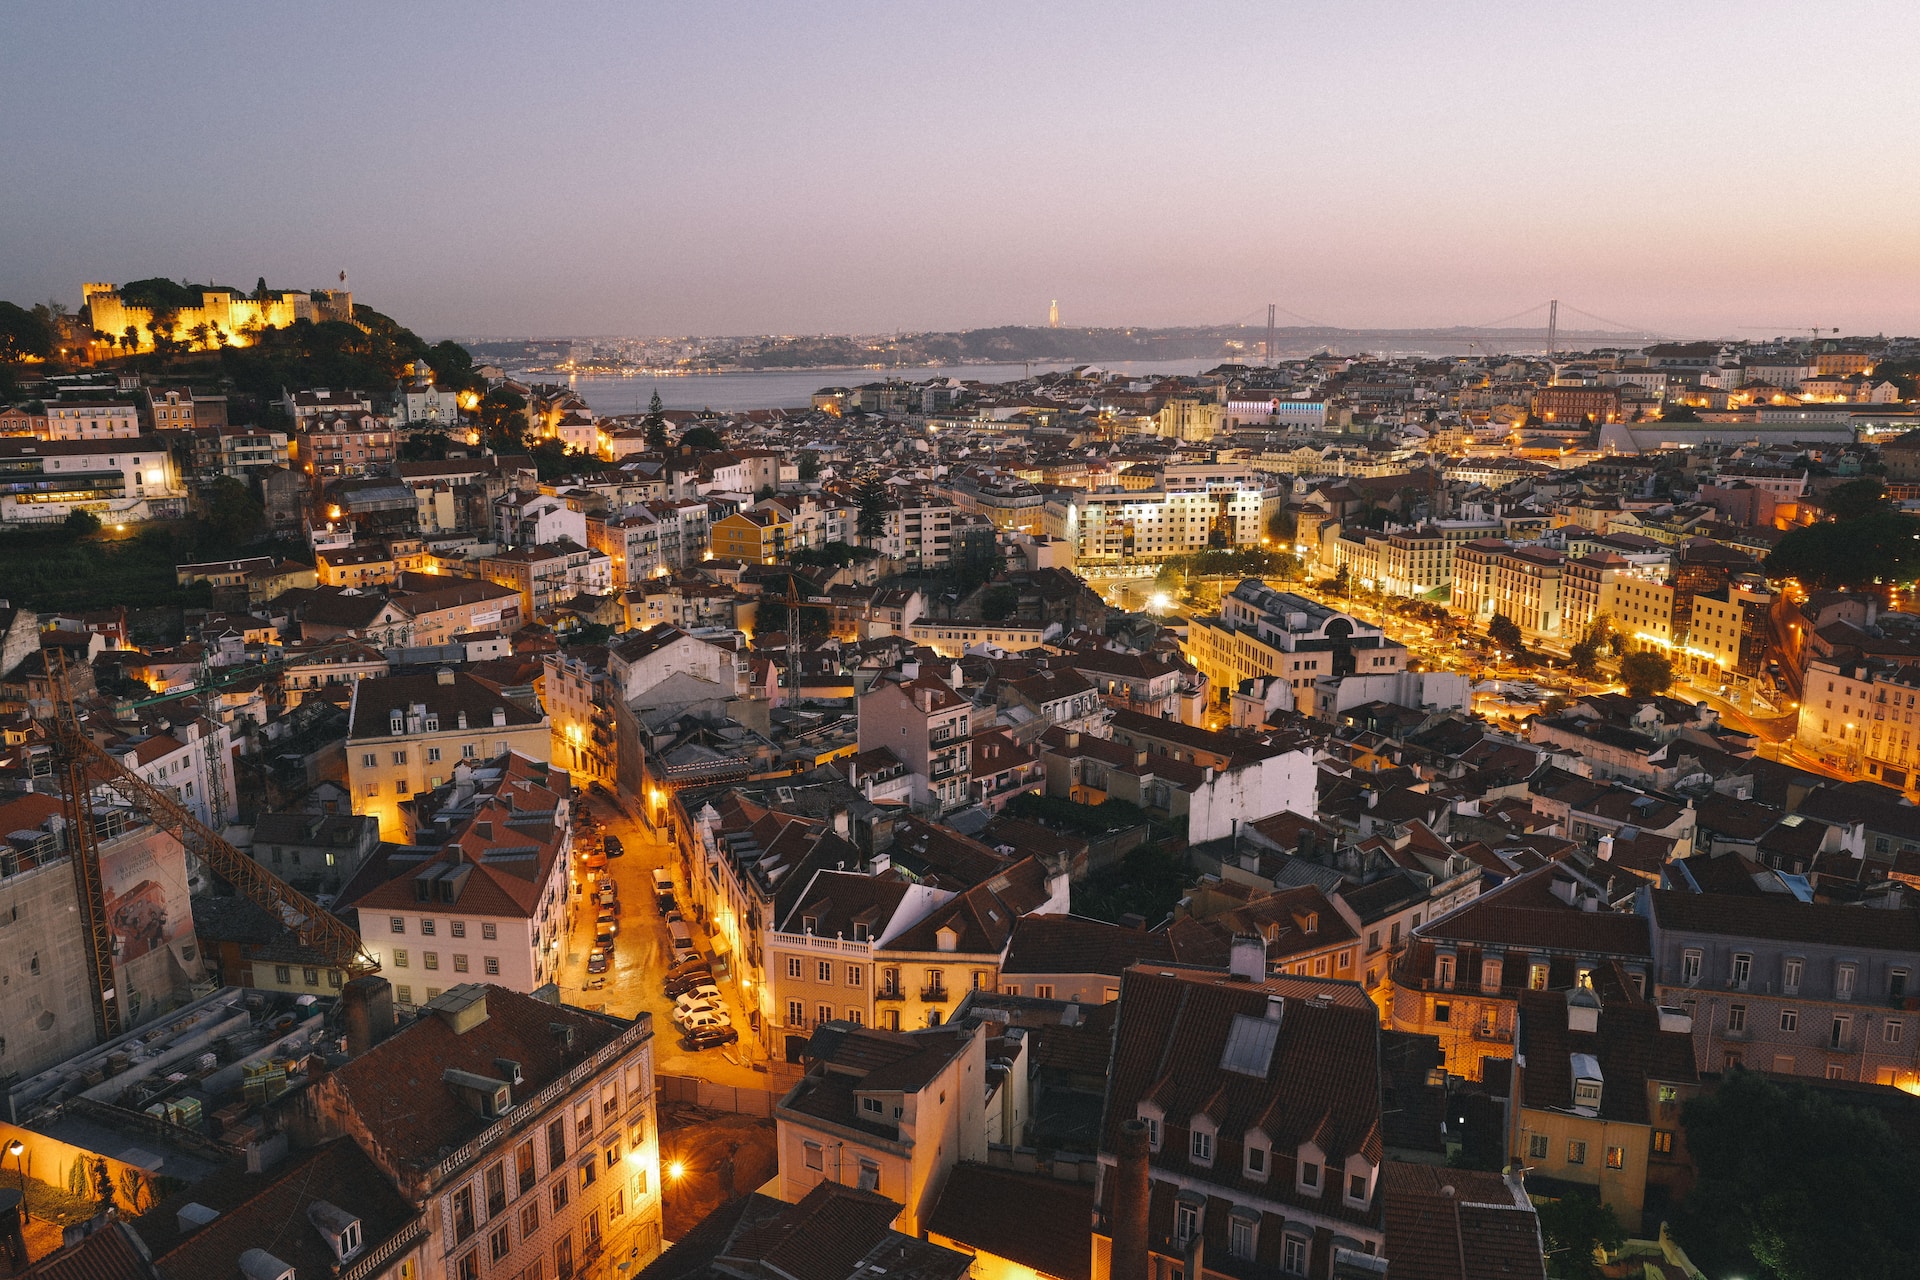 Aerial view of downtown Lisbon, Portugal at dusk.